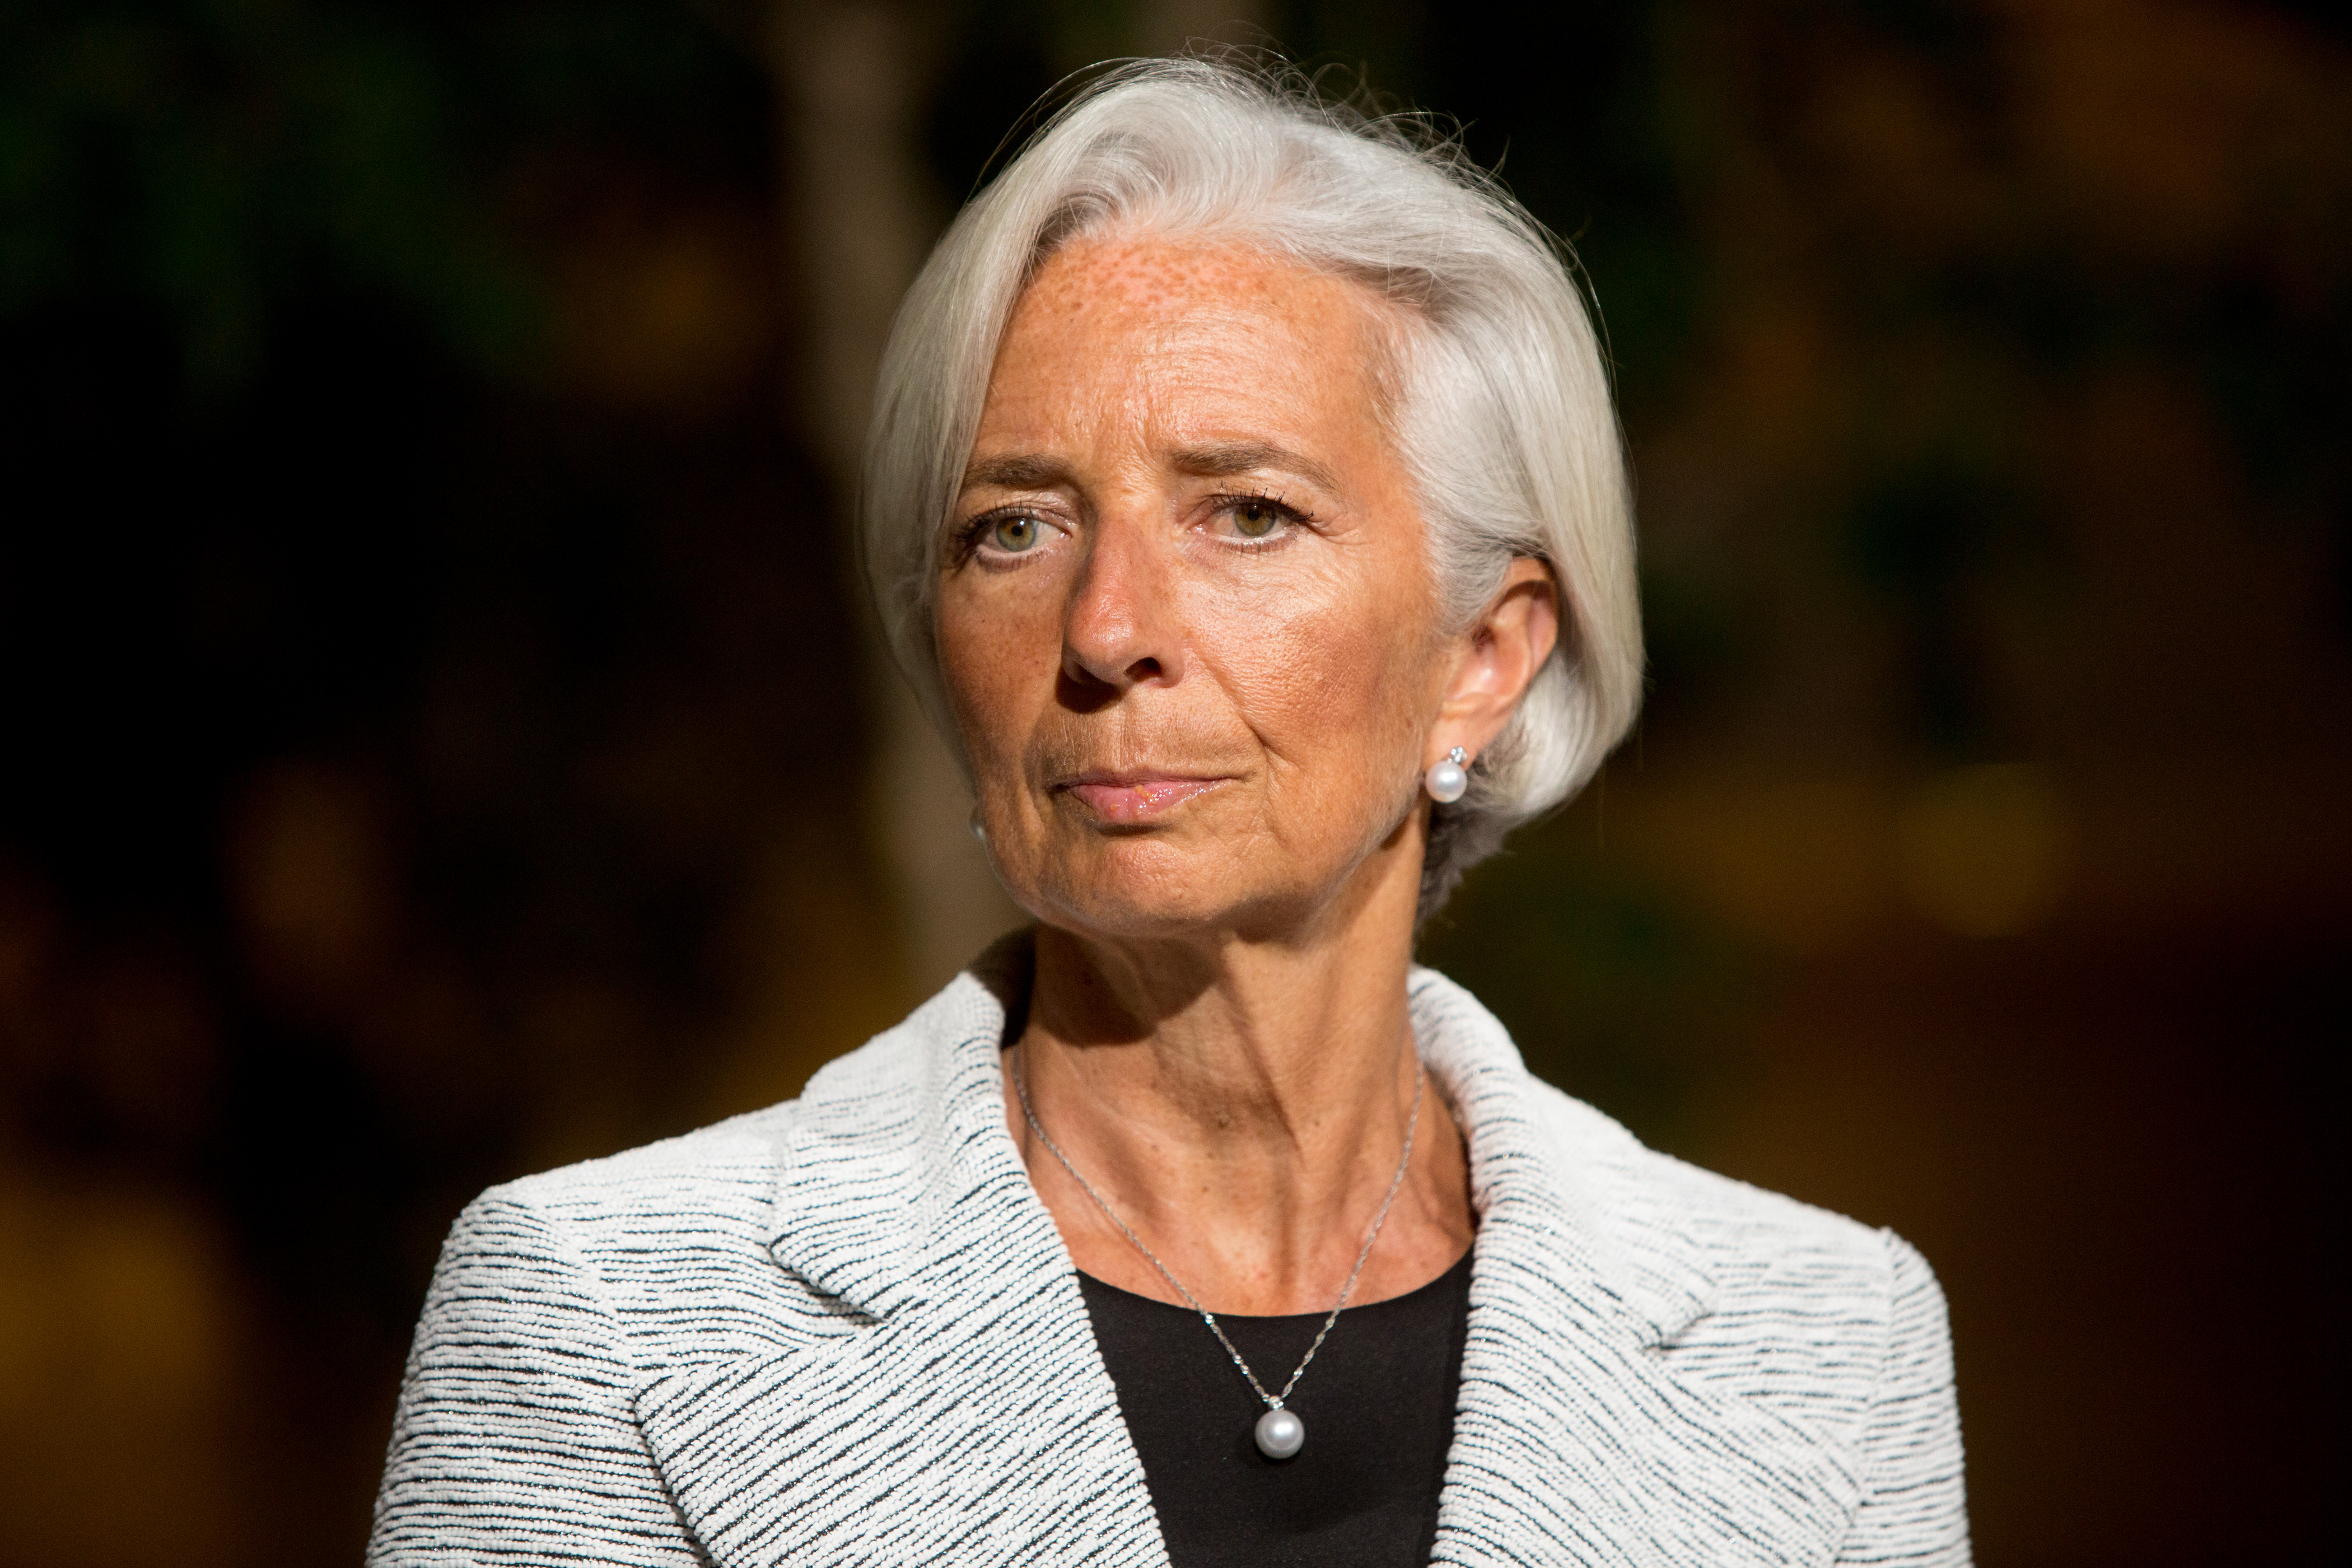 Christine Lagarde at IMF headquarters in Washington D.C., in April 2014. (Allison Shelley—Getty Images)